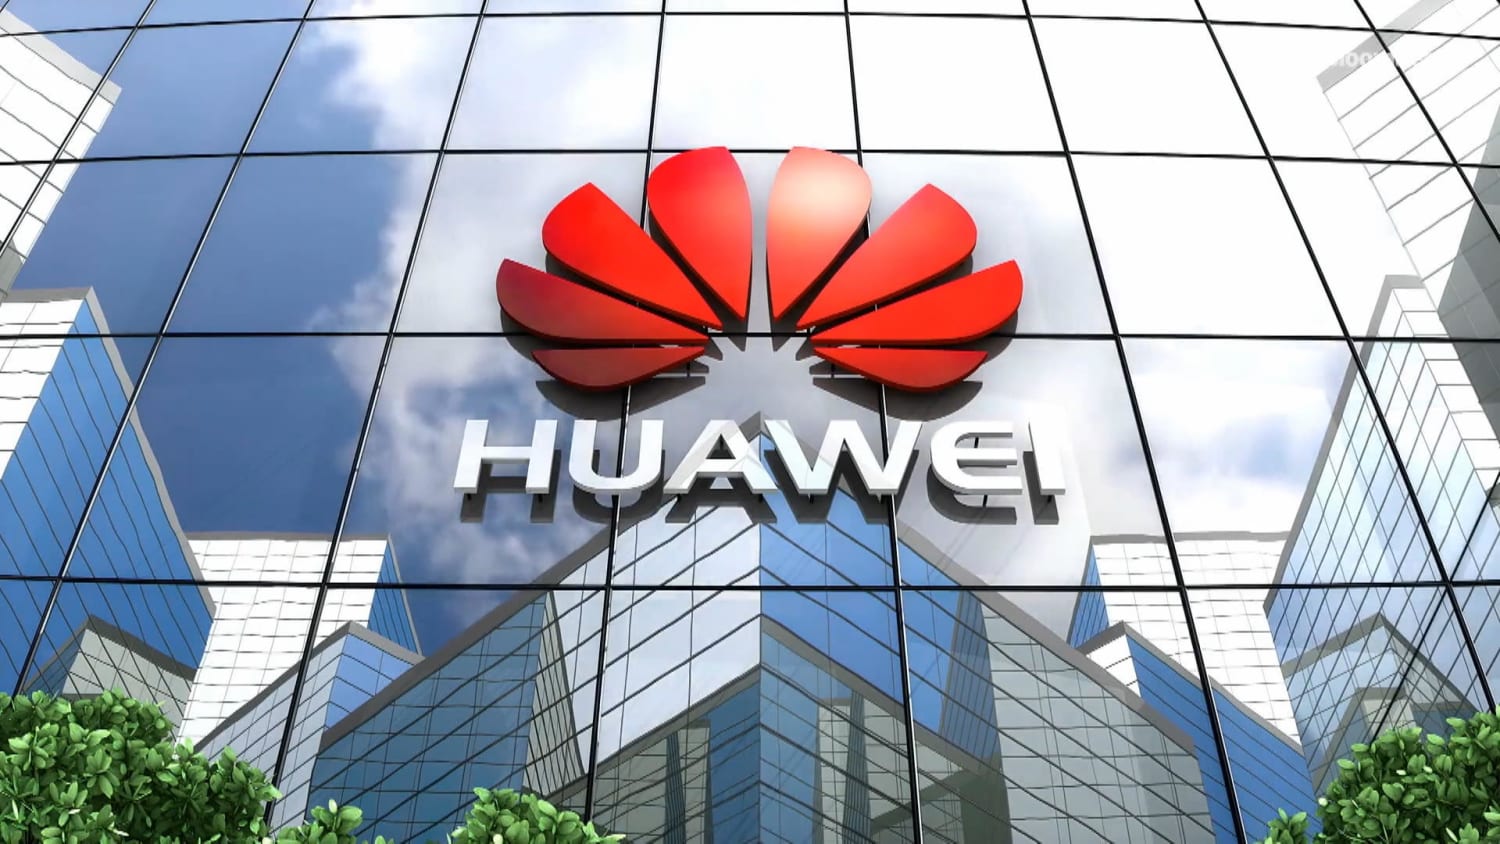 Huawei Takes Crown From Samsung As No.1 Smartphone Manufacturer - Latest Tech News, Reviews, Tips And Tutorials